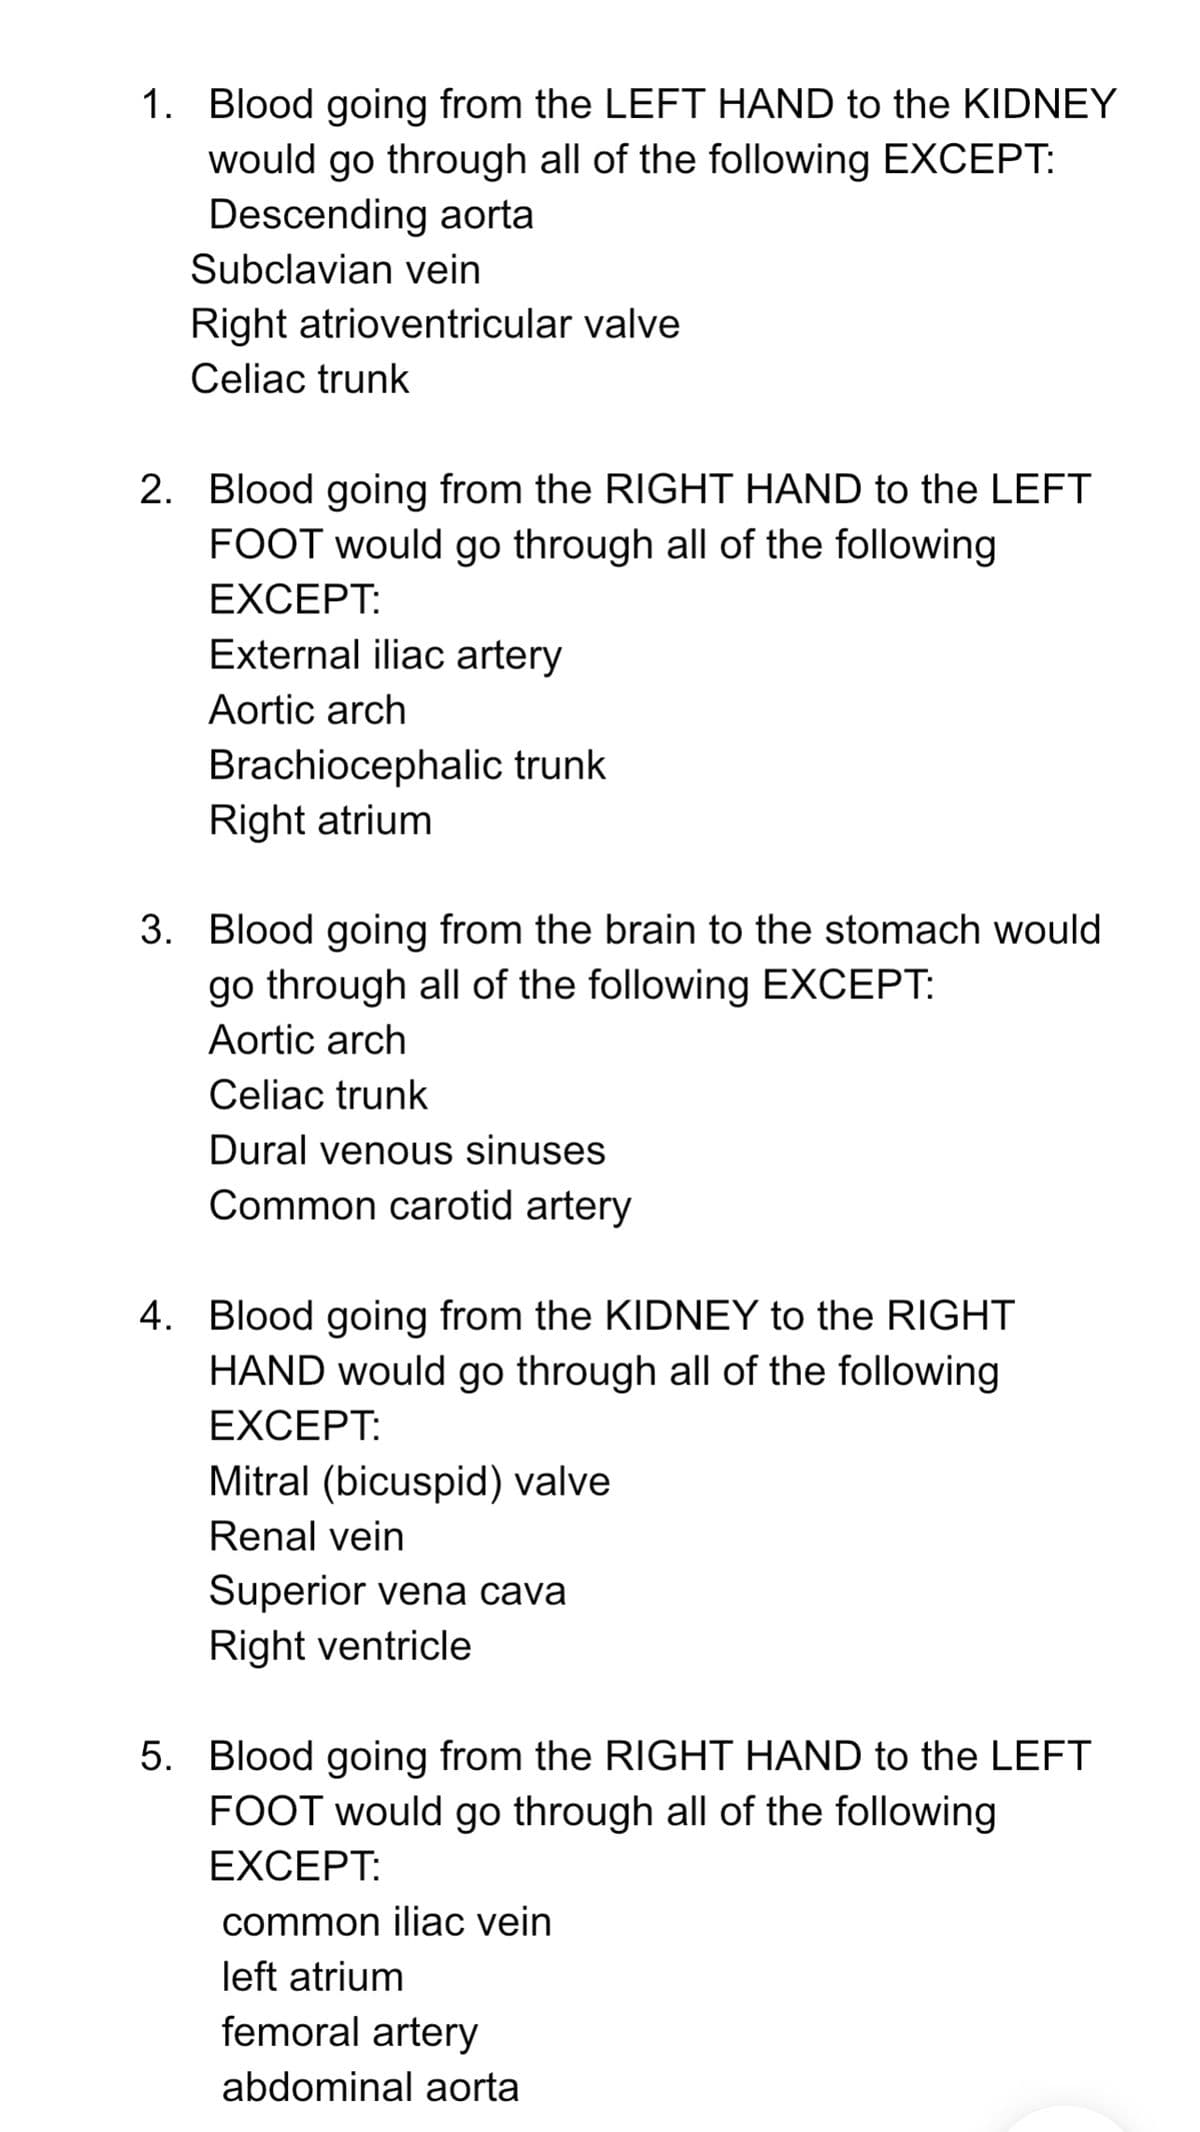 1. Blood going from the LEFT HAND to the KIDNEY
would go through all of the following EXCEPT:
Descending aorta
Subclavian vein
Right atrioventricular valve
Celiac trunk
2. Blood going from the RIGHT HAND to the LEFT
FOOT would go through all of the following
EXCEPT:
External iliac artery
Aortic arch
Brachiocephalic trunk
Right atrium
3. Blood going from the brain to the stomach would
go through all of the following EXCEPT:
Aortic arch
Celiac trunk
Dural venous sinuses
Common carotid artery
4. Blood going from the KIDNEY to the RIGHT
HAND would go through all of the following
EXCEPT:
Mitral (bicuspid) valve
Renal vein
Superior vena cava
Right ventricle
5. Blood going from the RIGHT HAND to the LEFT
FOOT would go through all of the following
EXCEPT:
common iliac vein
left atrium
femoral artery
abdominal aorta